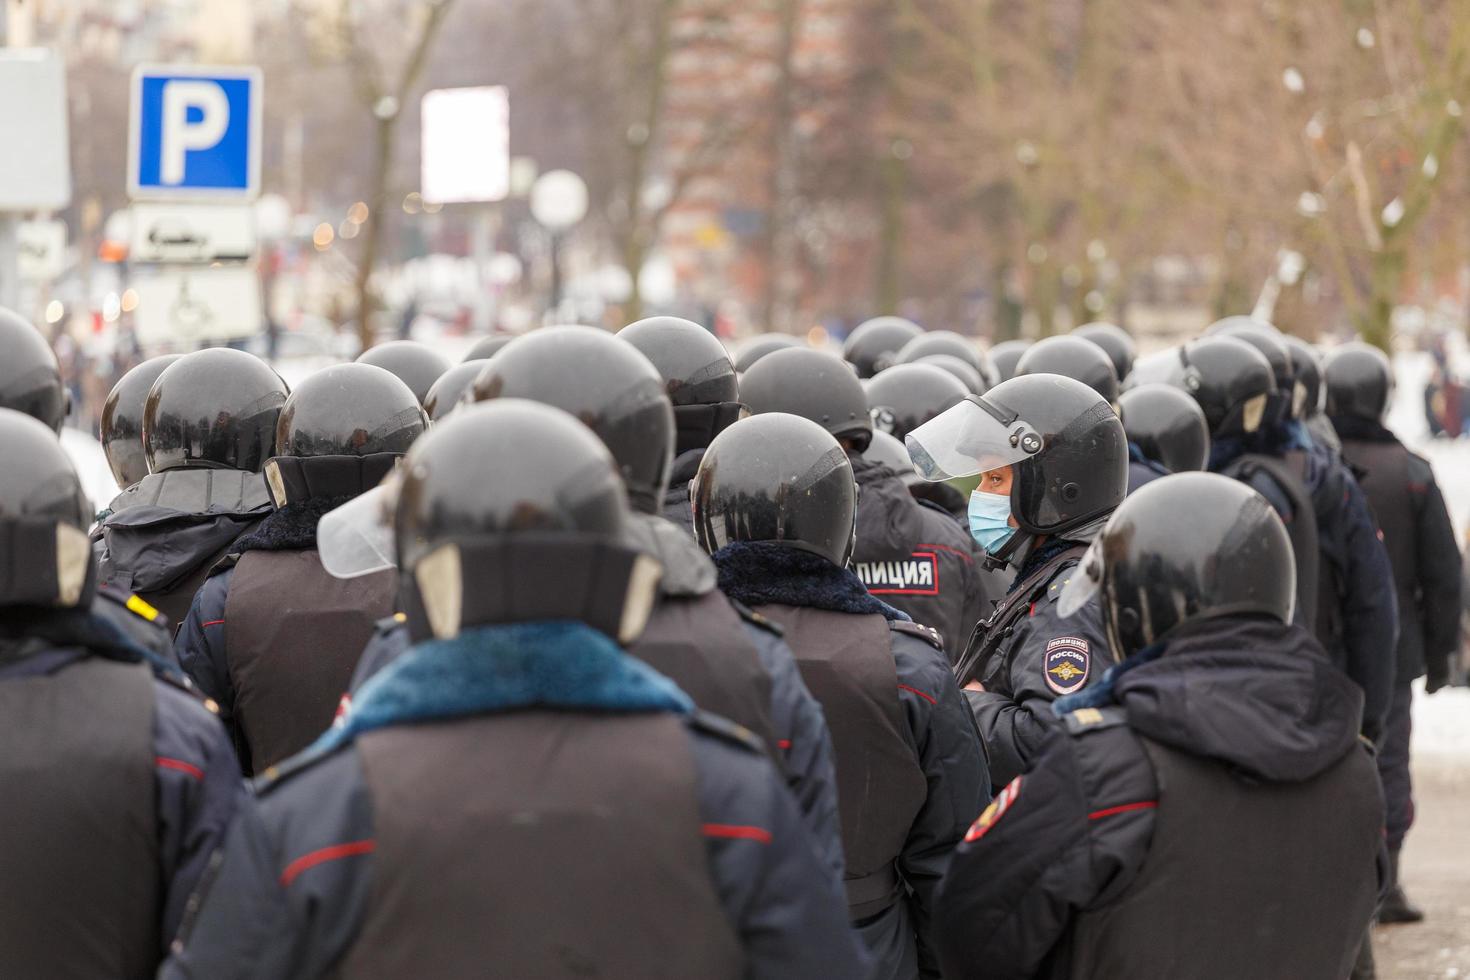 TULA, RUSSIA JANUARY 23, 2021 Public meeting in support of Navalny, police officers in black helmets wait for the command to arrest the protesters. photo